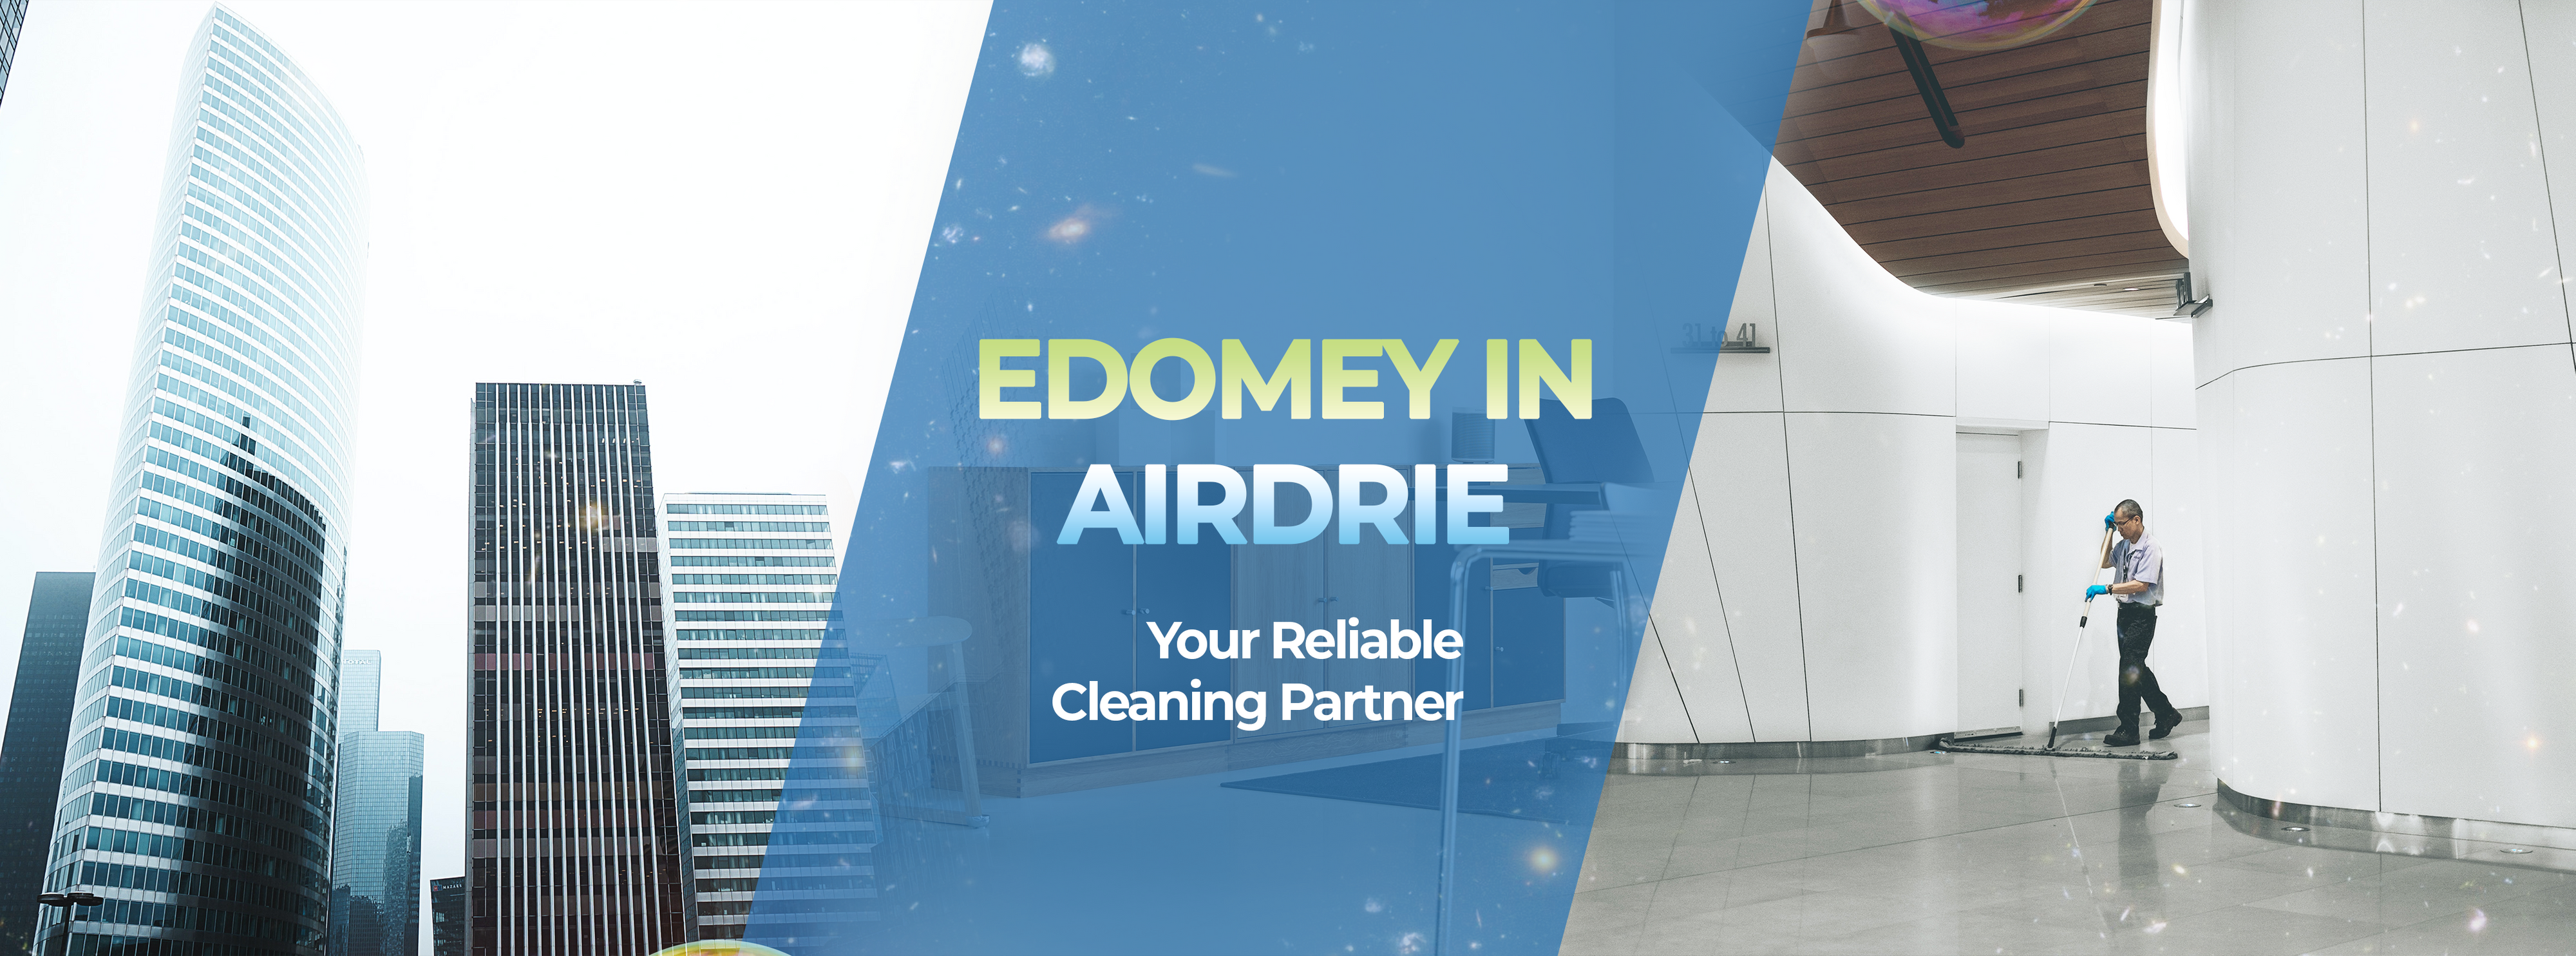 Cleaning Services in Airdrie affordable